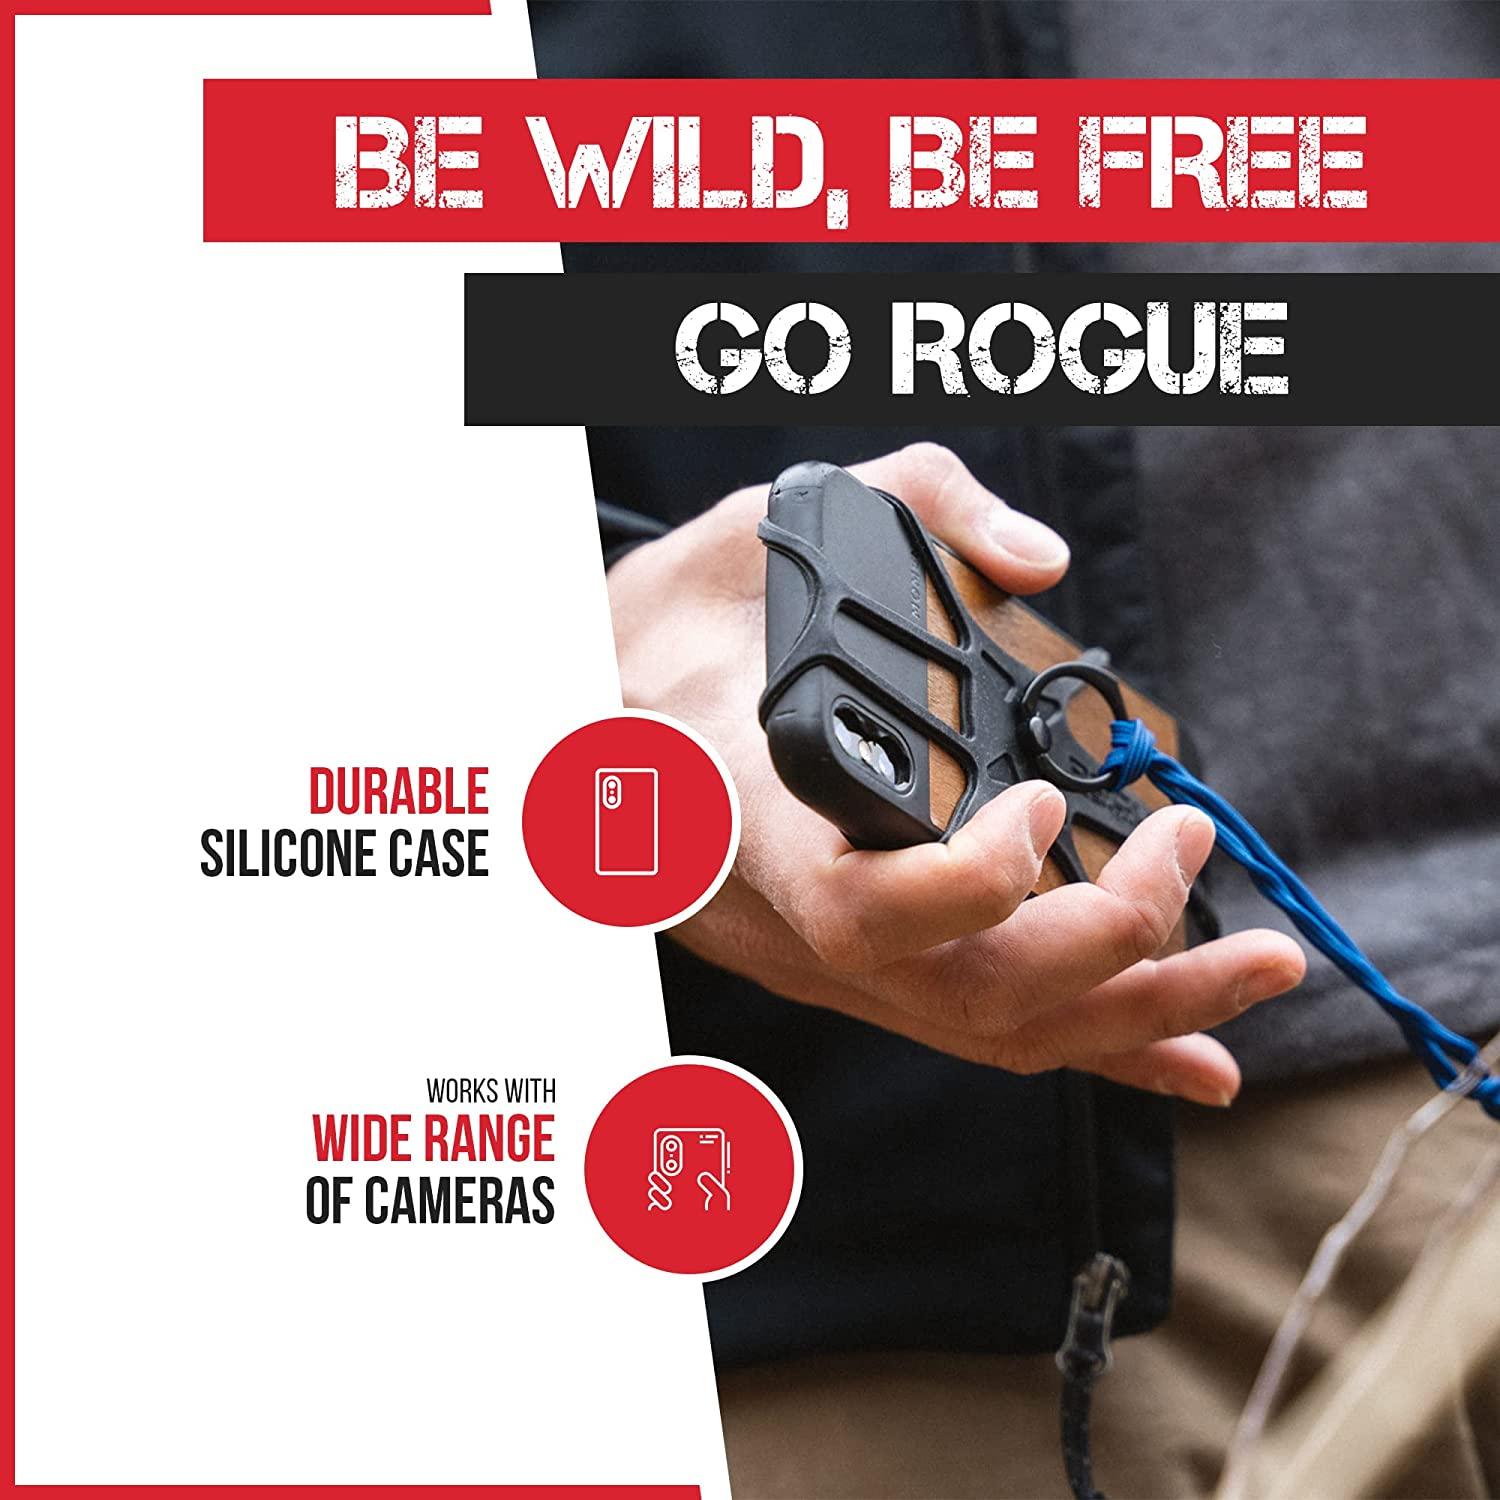 Rogue Fishing Co. The Protector Phone Tether